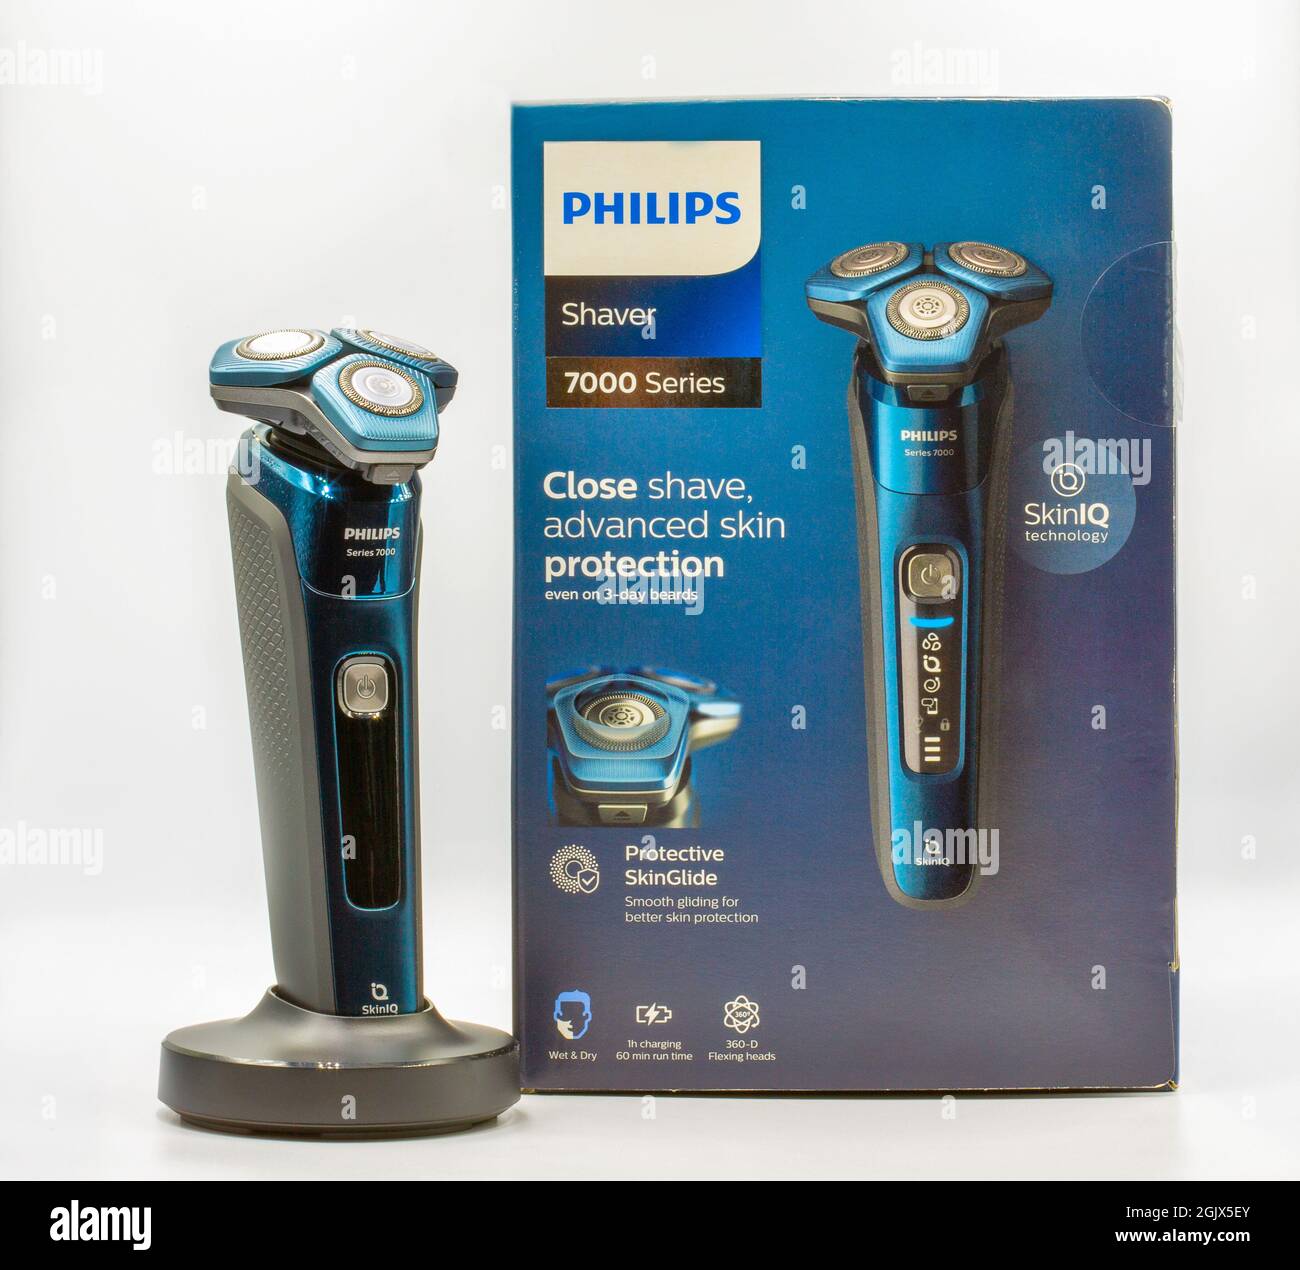 KYIV, UKRAINE - APRIL 03, 2021: Studio shot of modern Philips electric shaver 7000 series closeup against white. Philips is a Dutch multinational cong Stock Photo